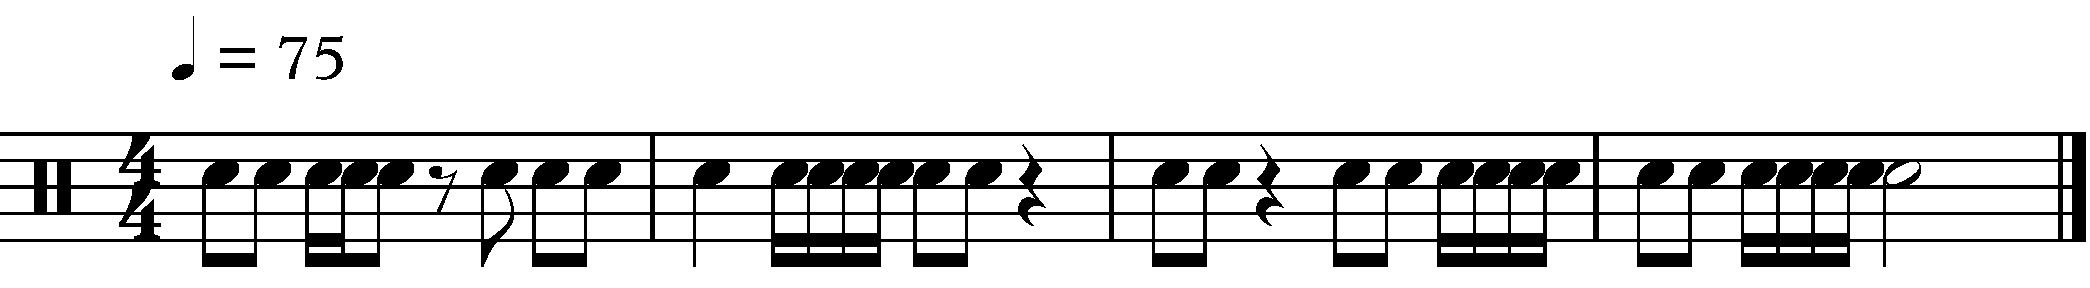 An example of a sight reading test